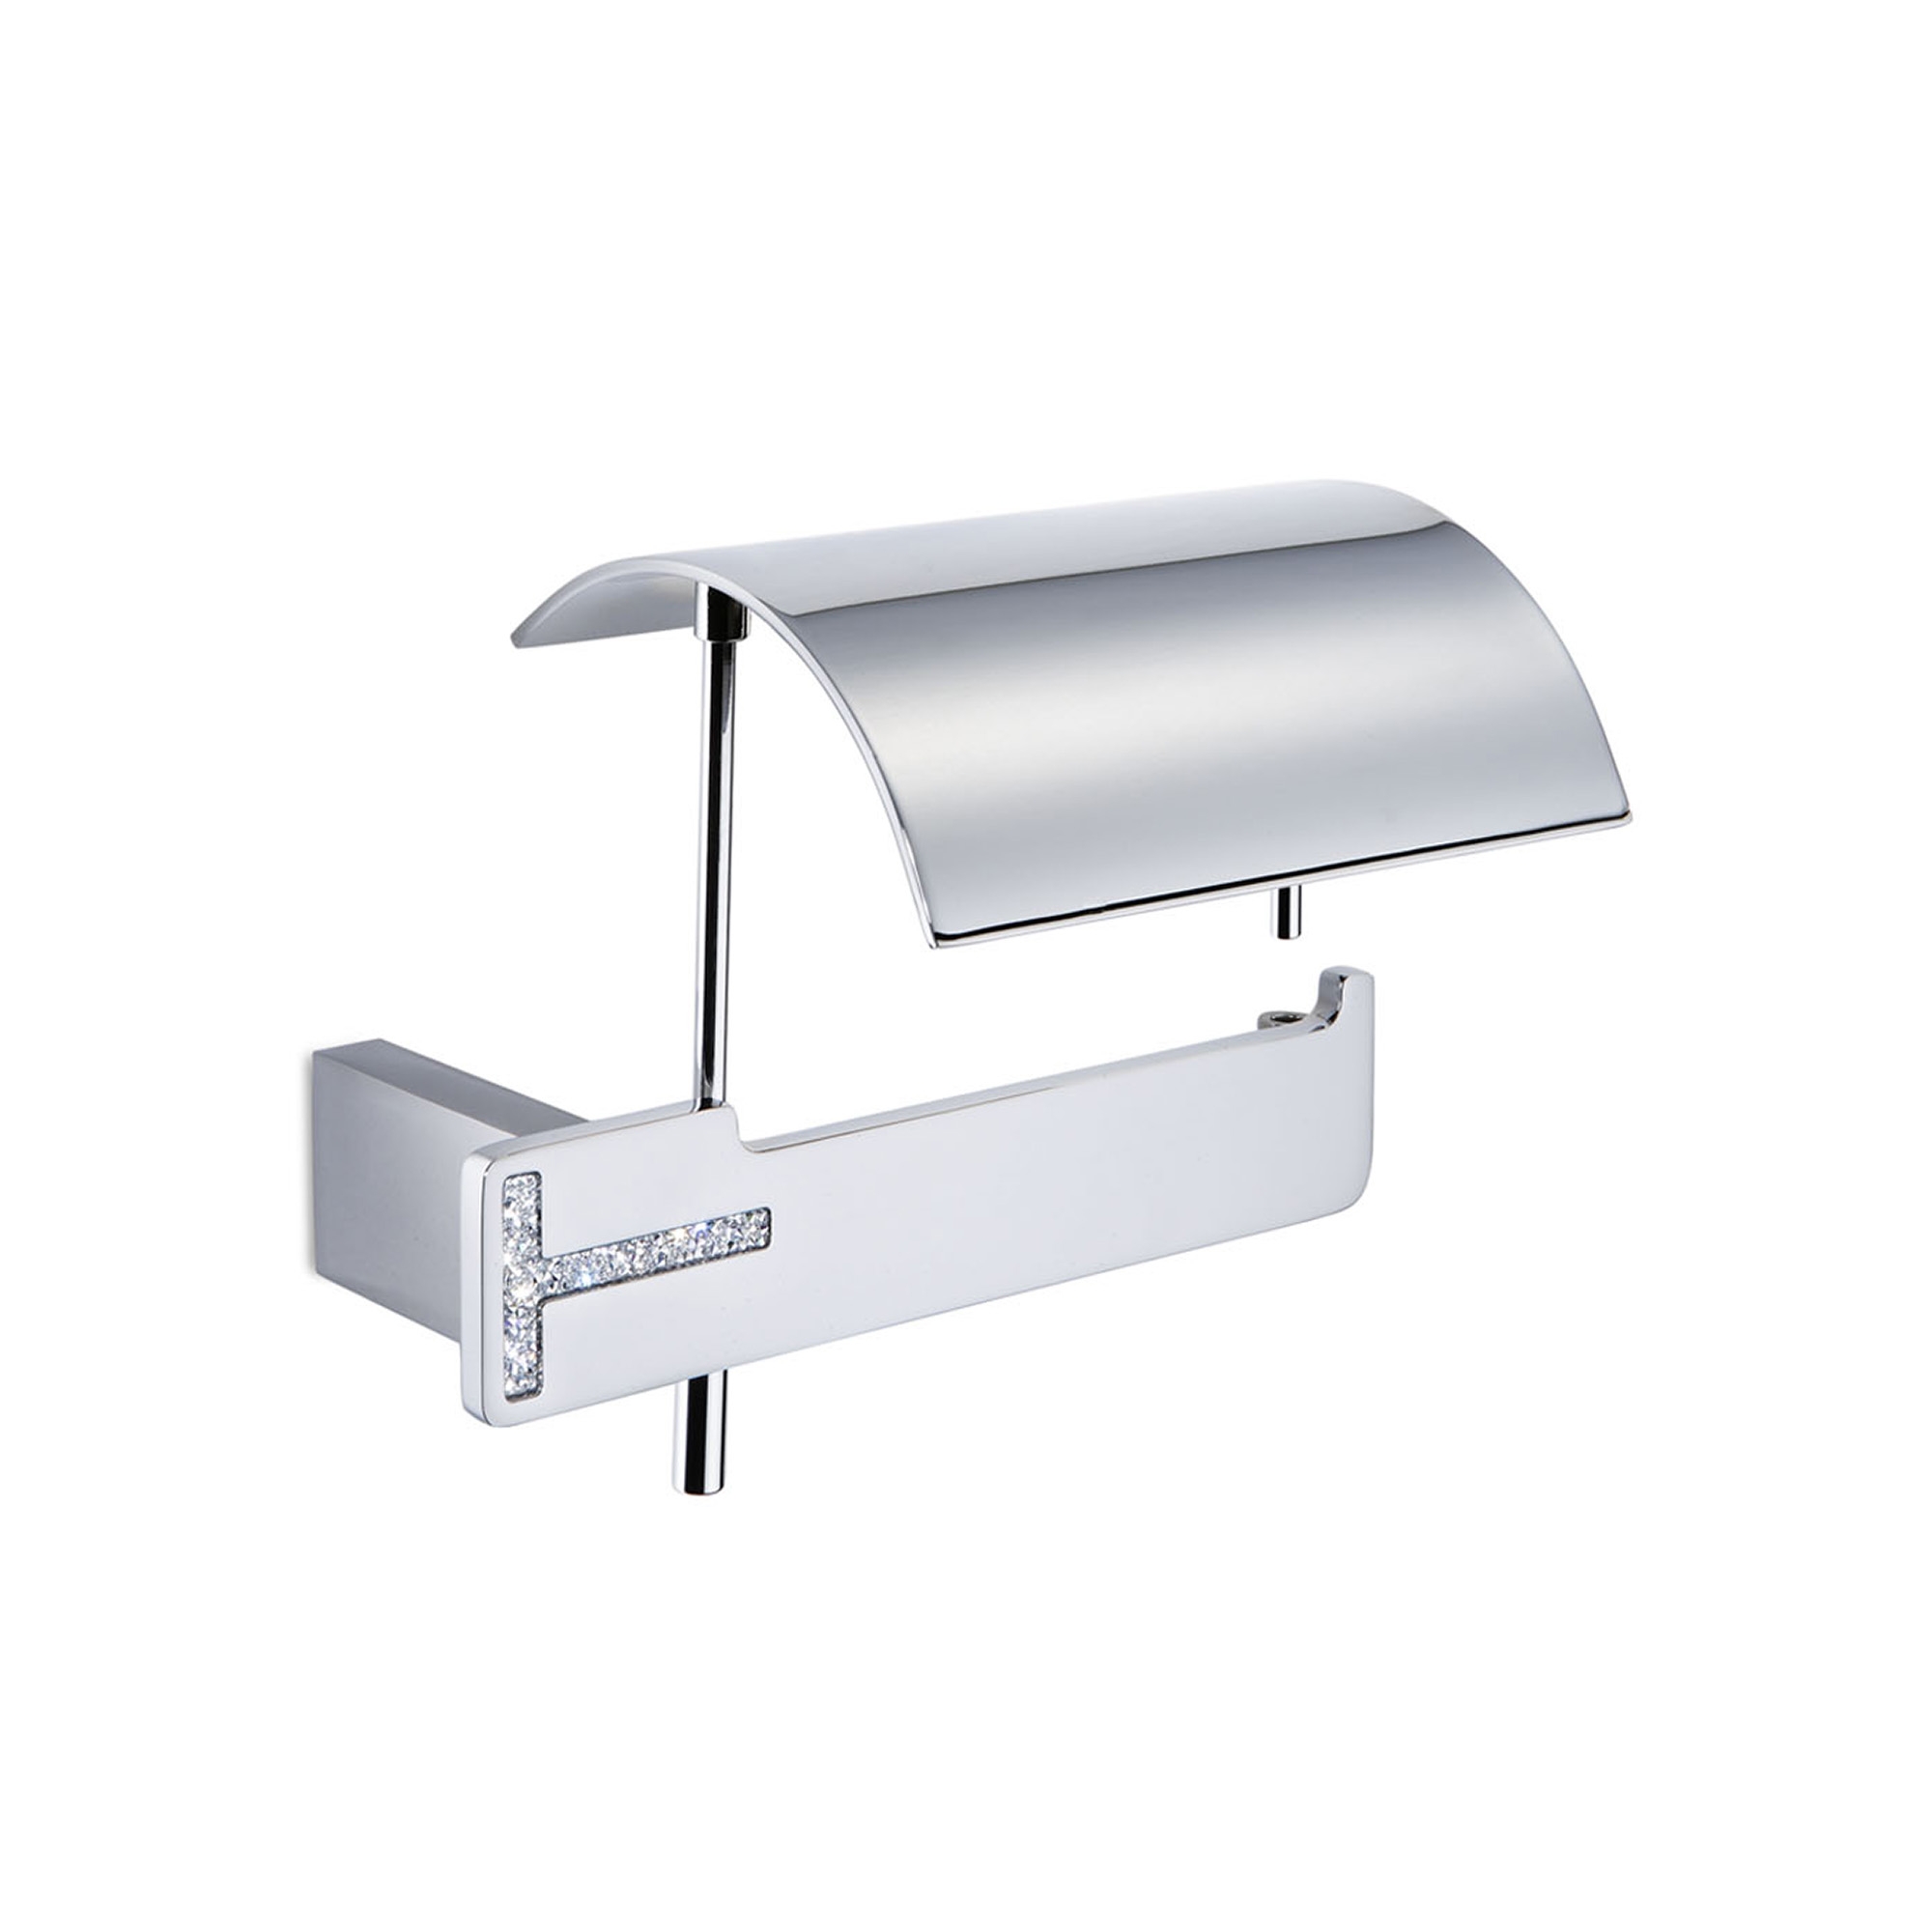 Verona VE 3211C Toilet Paper Holder with Cover in Polished Chrome